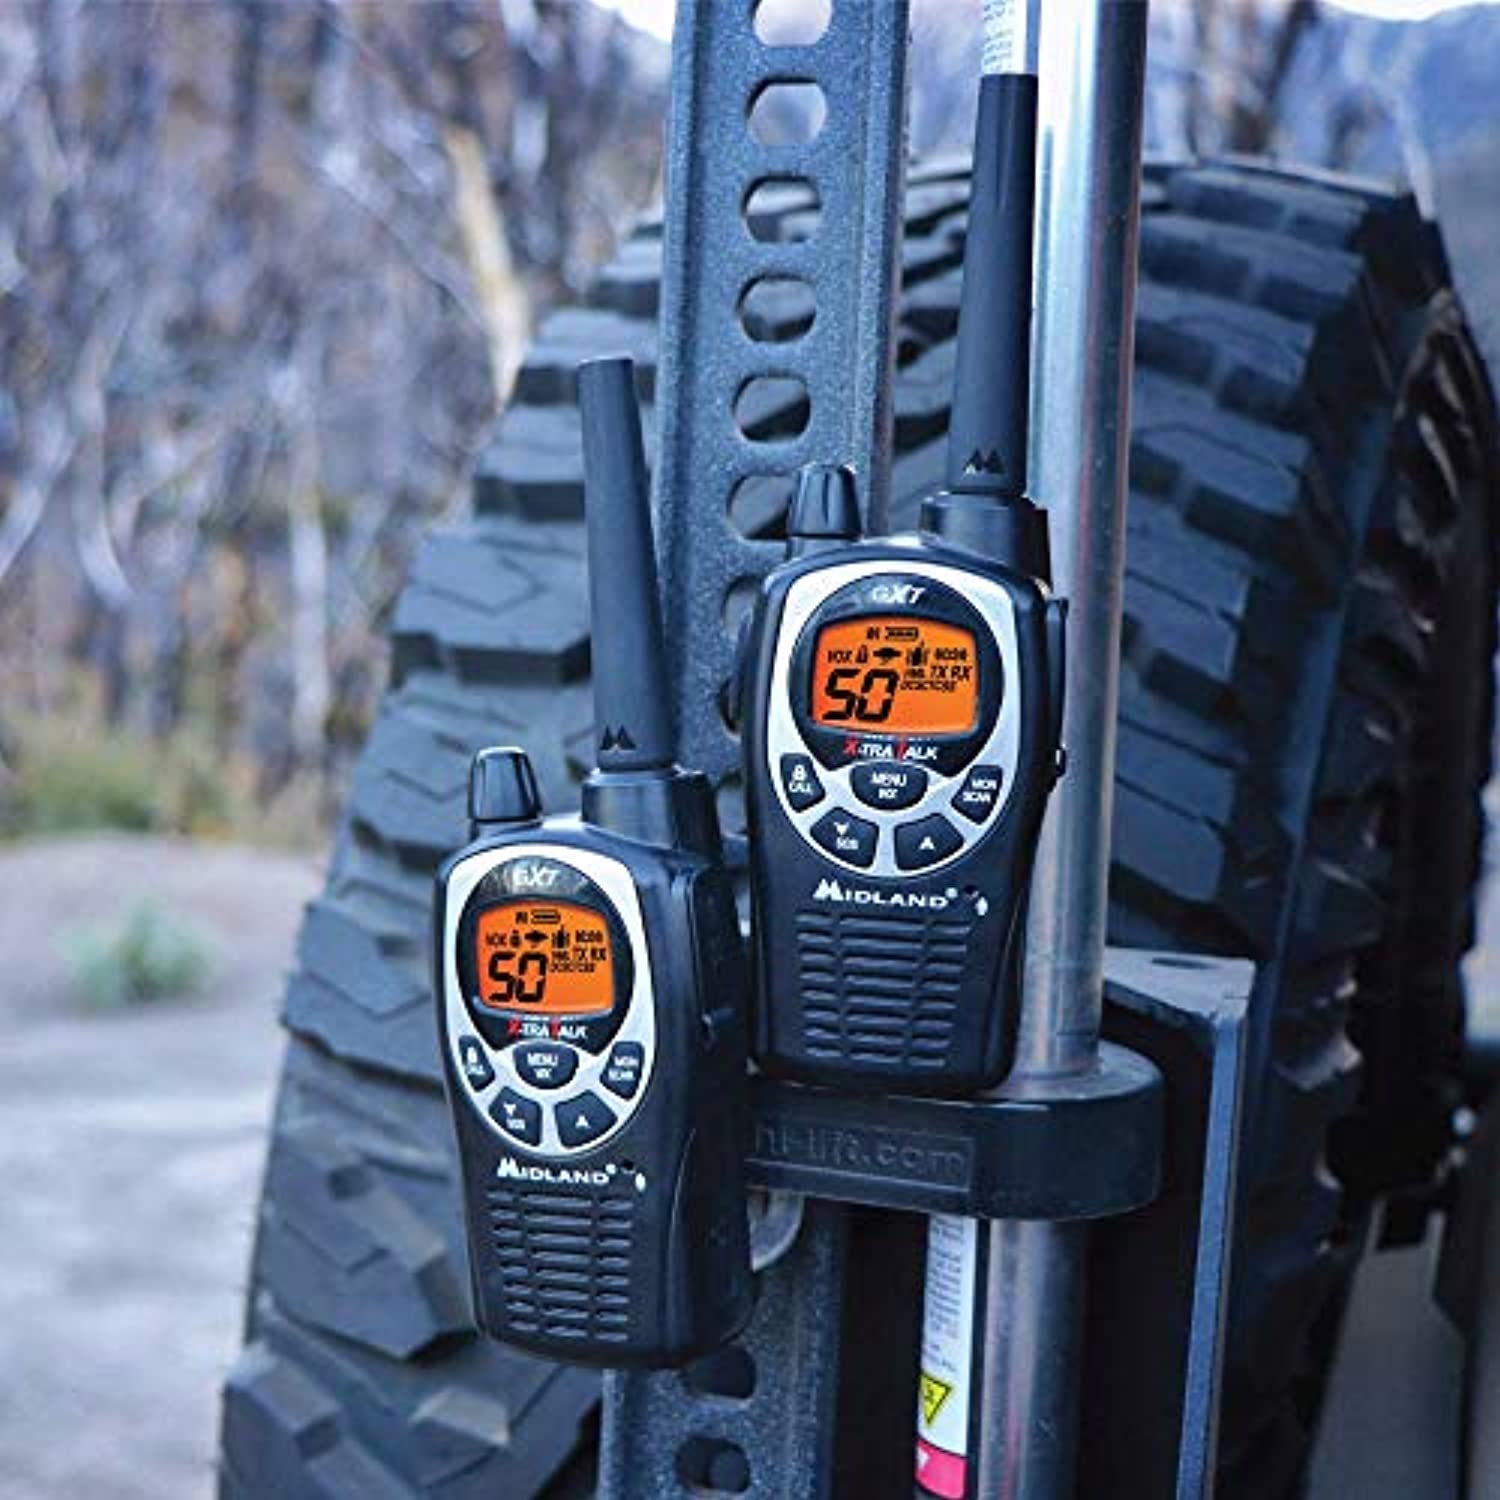 Midland GXT1000VP4 50 Channel GMRS Two-Way Radio Up to 36 Mile Range  Walkie Talkie Black/Silver (Pack of 4)